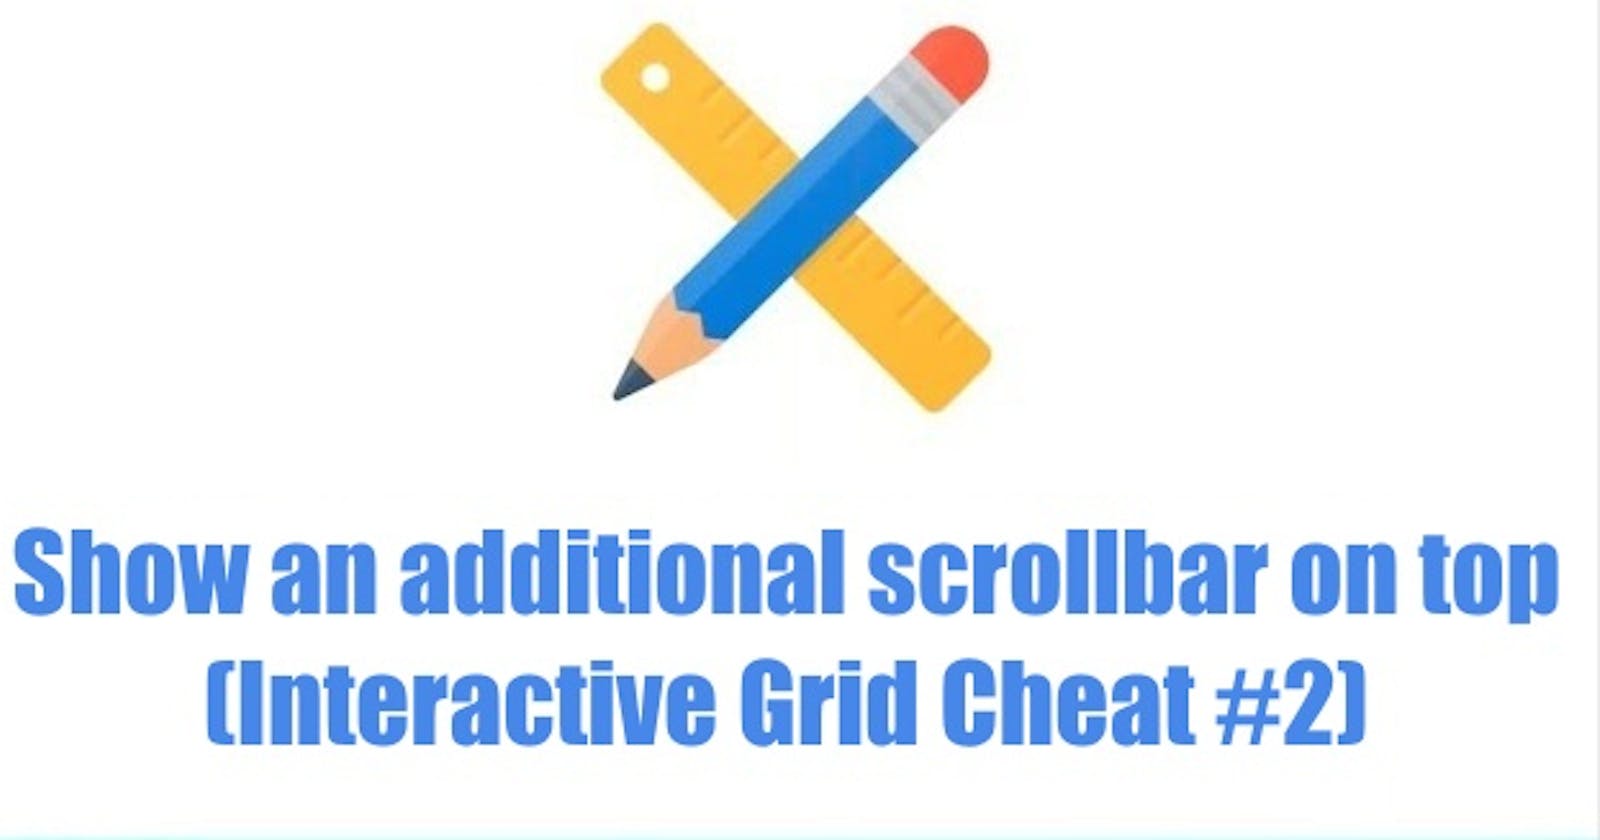 Show an additional scrollbar on top (Interactive Grid #2)